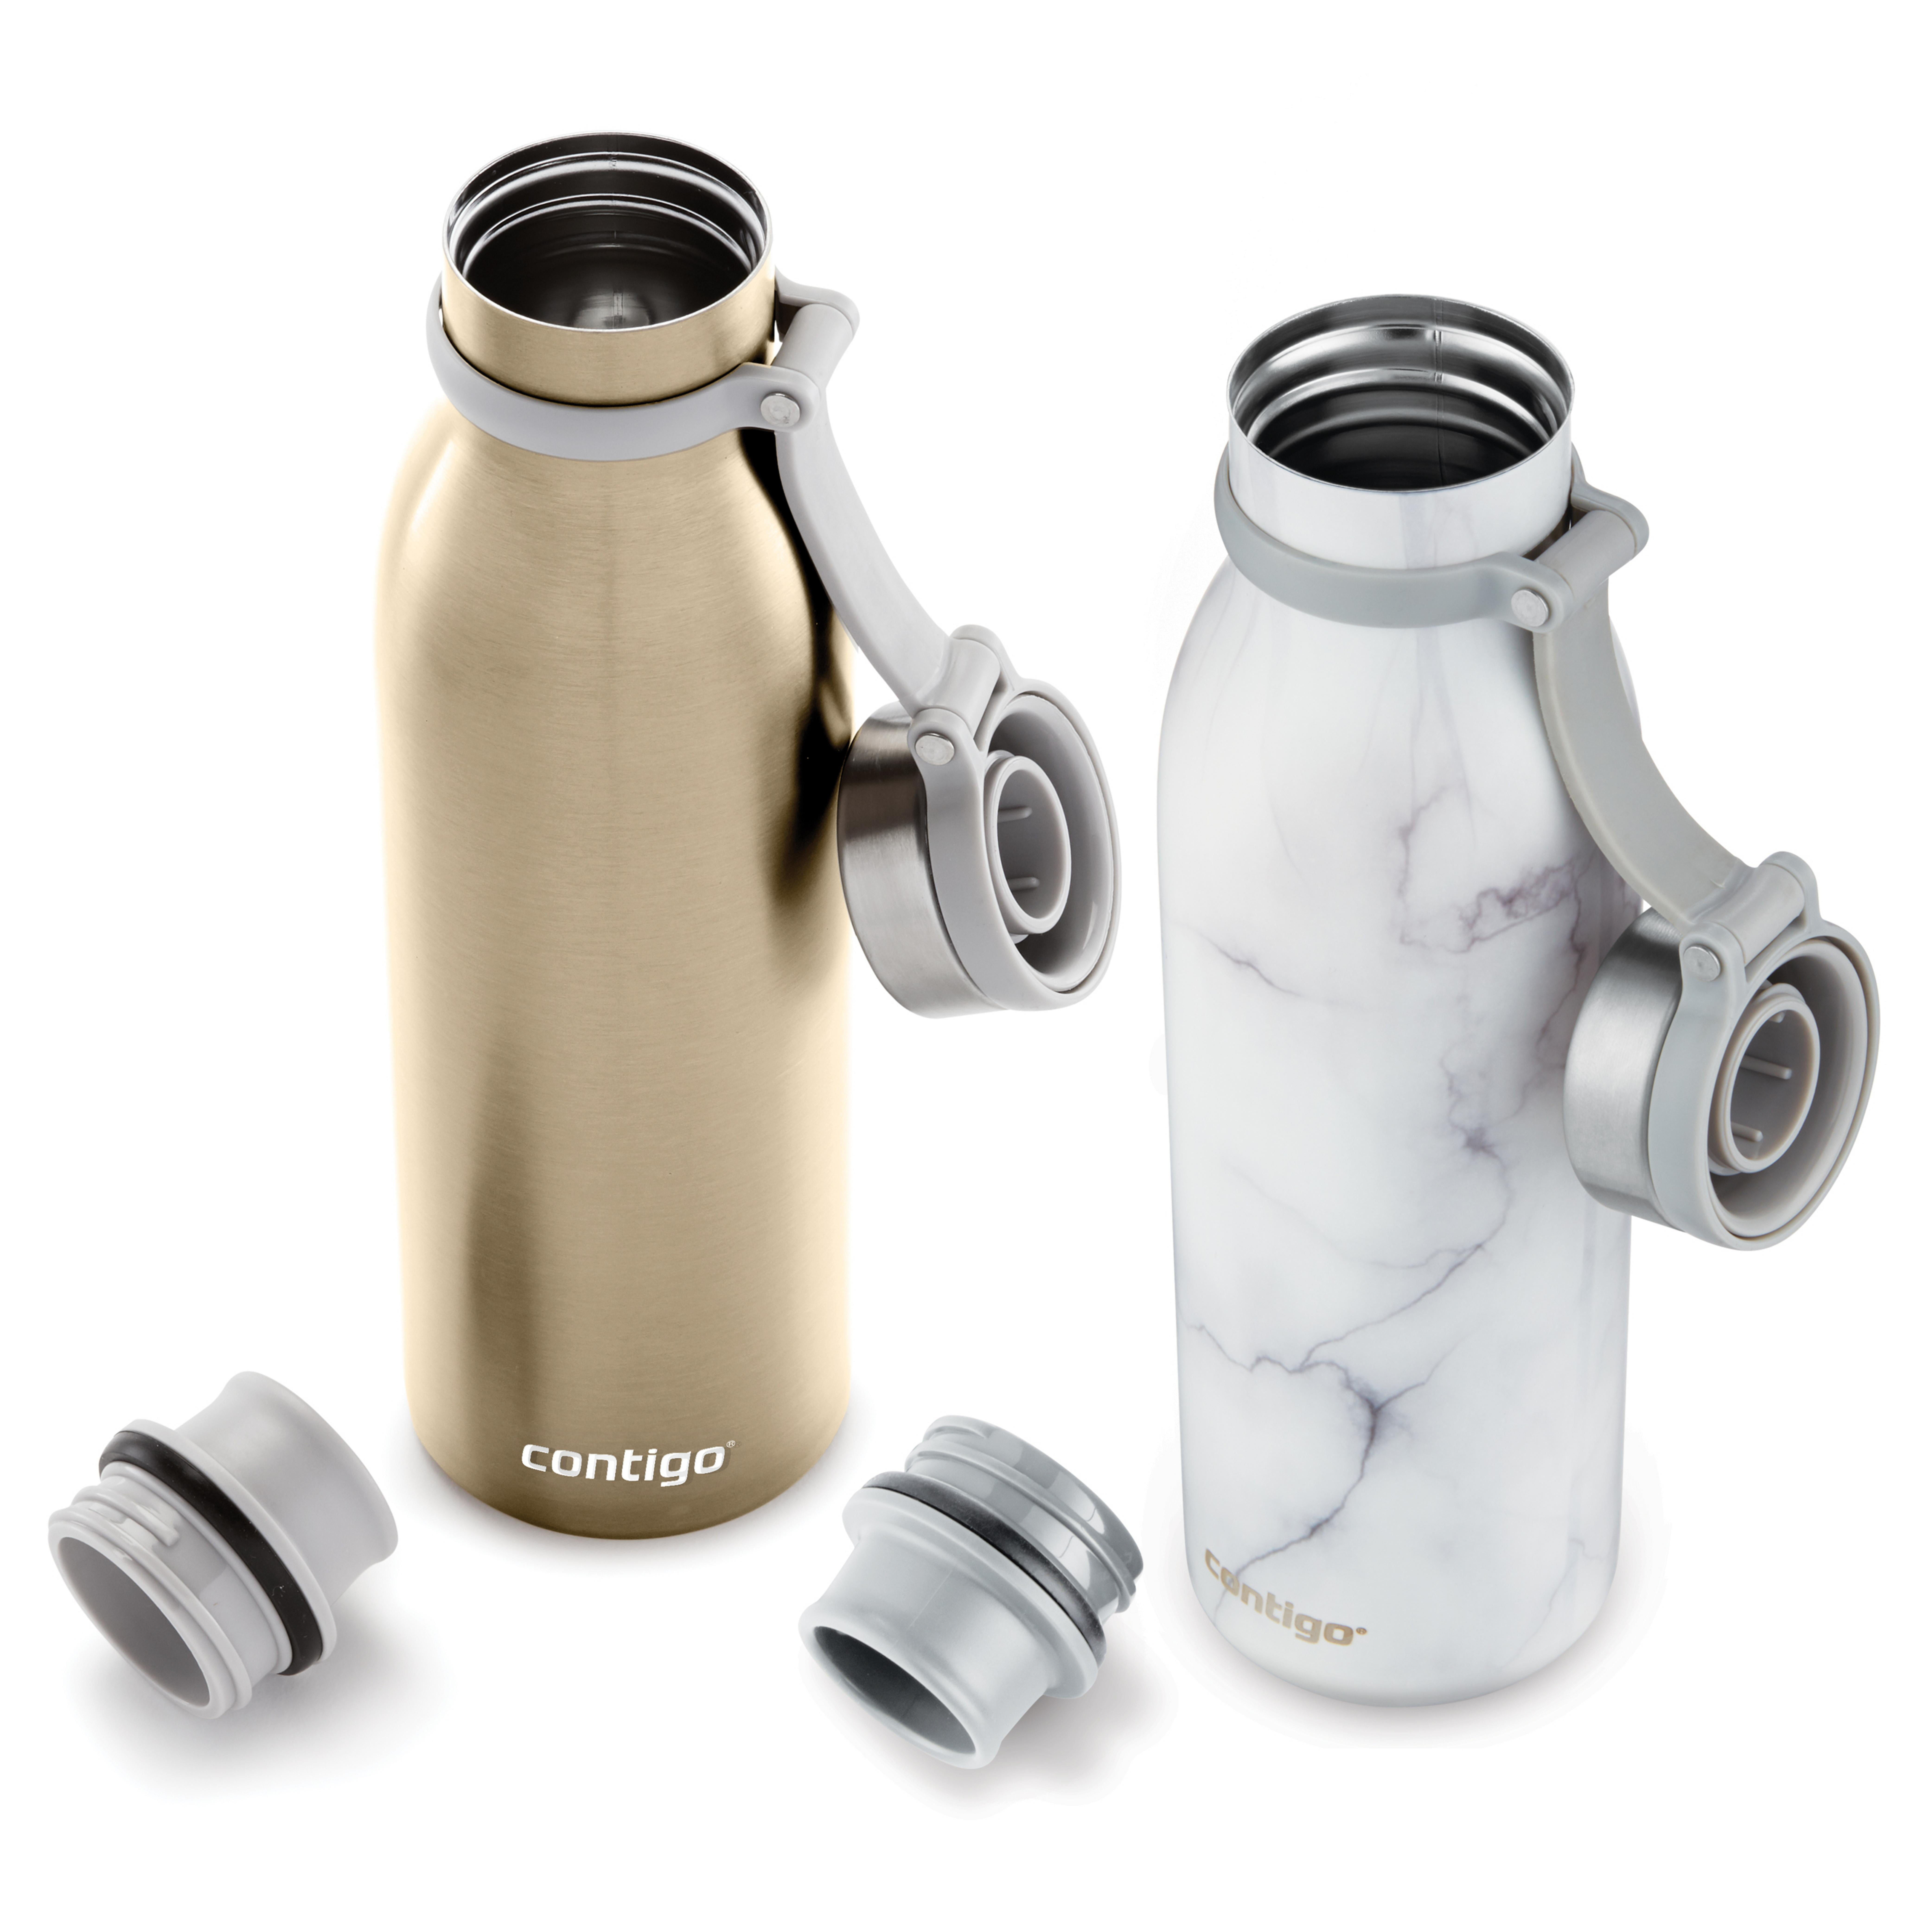 Contigo Autoseal Couture 20oz Vacuum Insulated Stainless Steel Water Bottle 2 PK for sale online